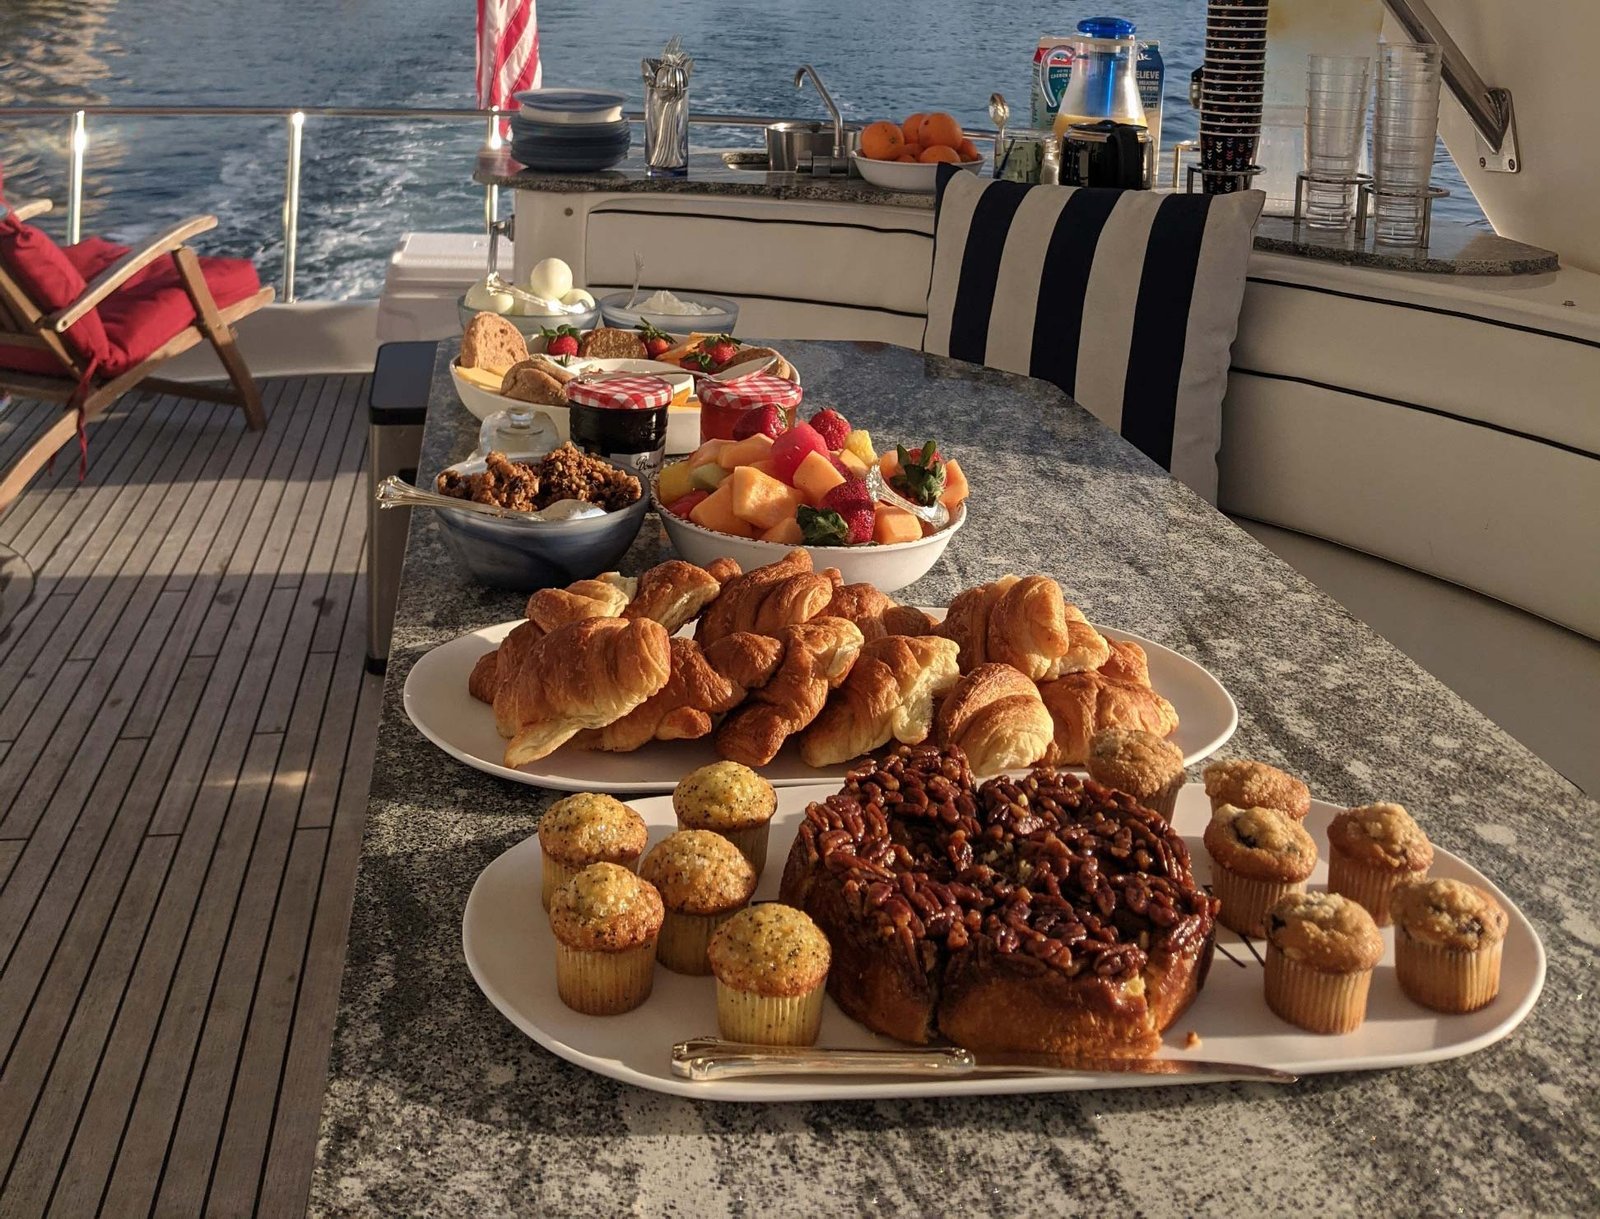 Photo of a spread of pastries and fruit on a table on a yacht.